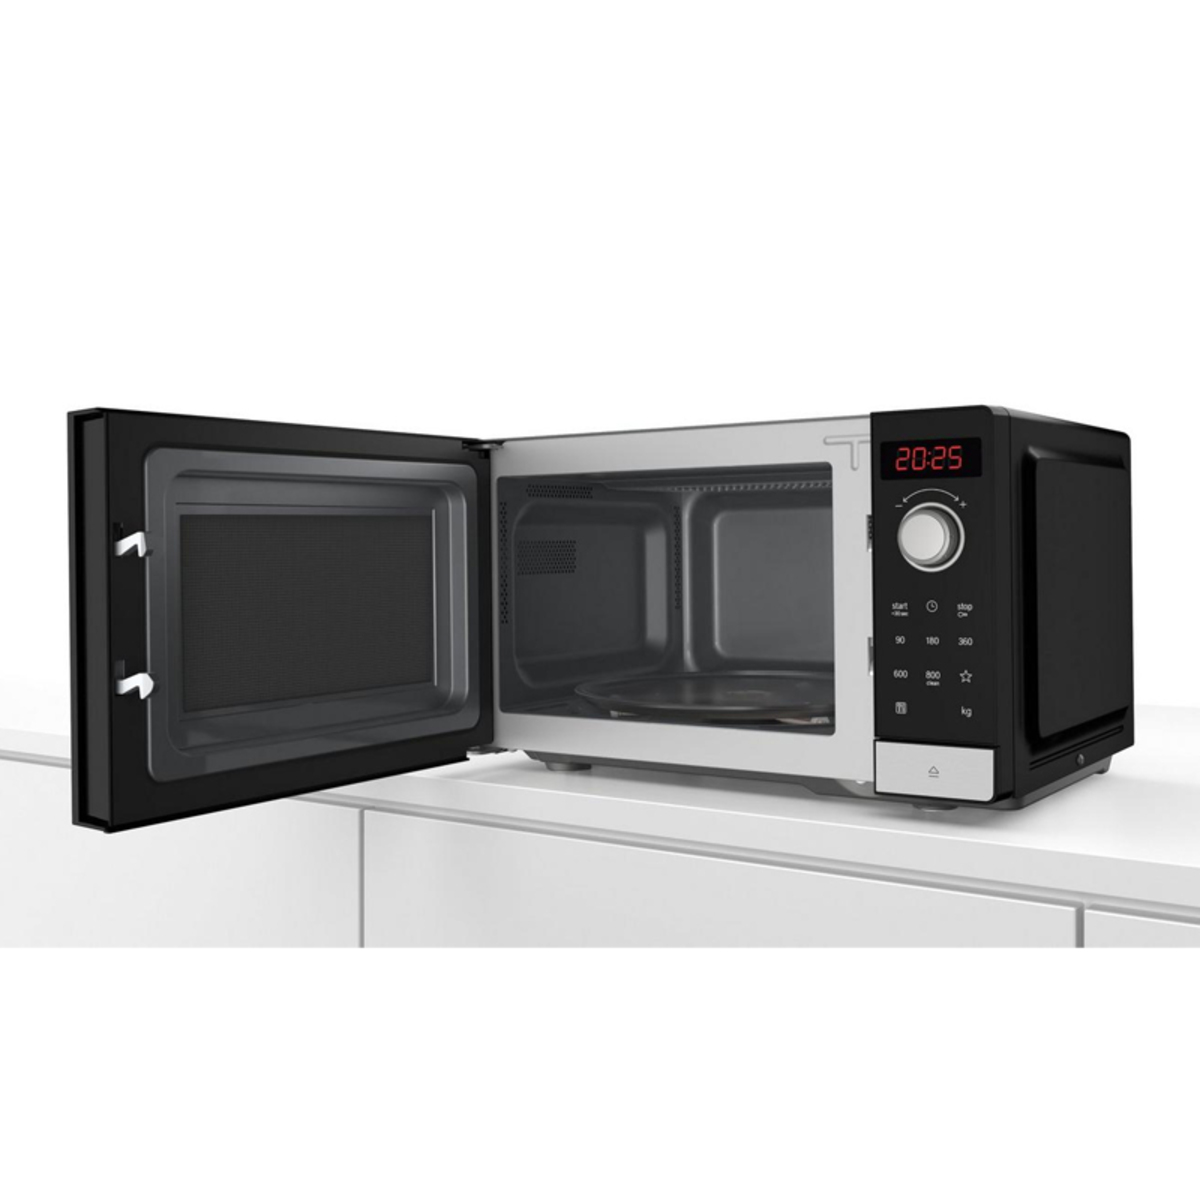 Bosch FFL023MS2B 800w 20 Litres Solo Microwave Oven, Black/Stainless